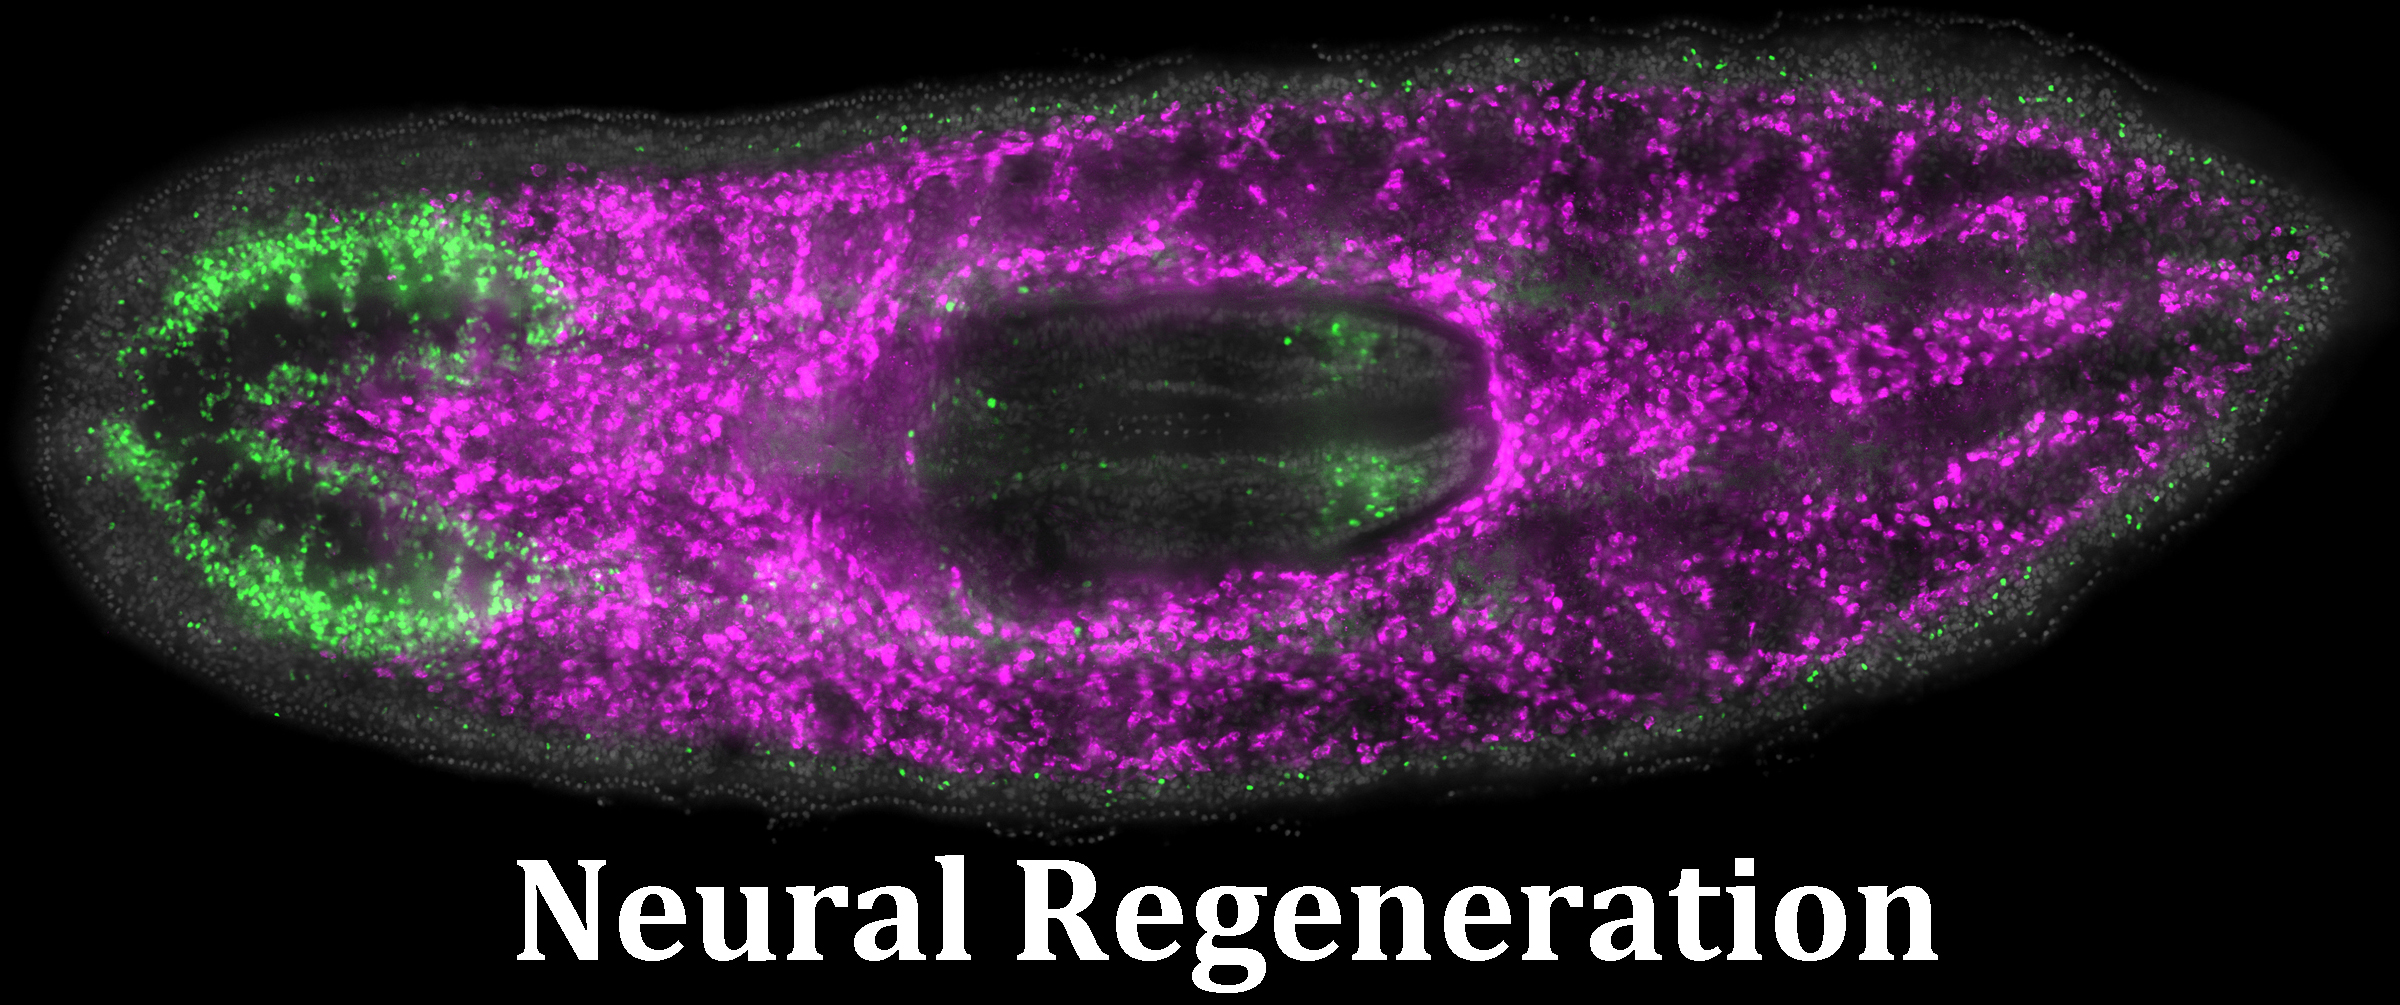 Piwi labelled cells in planar - image for neural regeneration projects in the lab